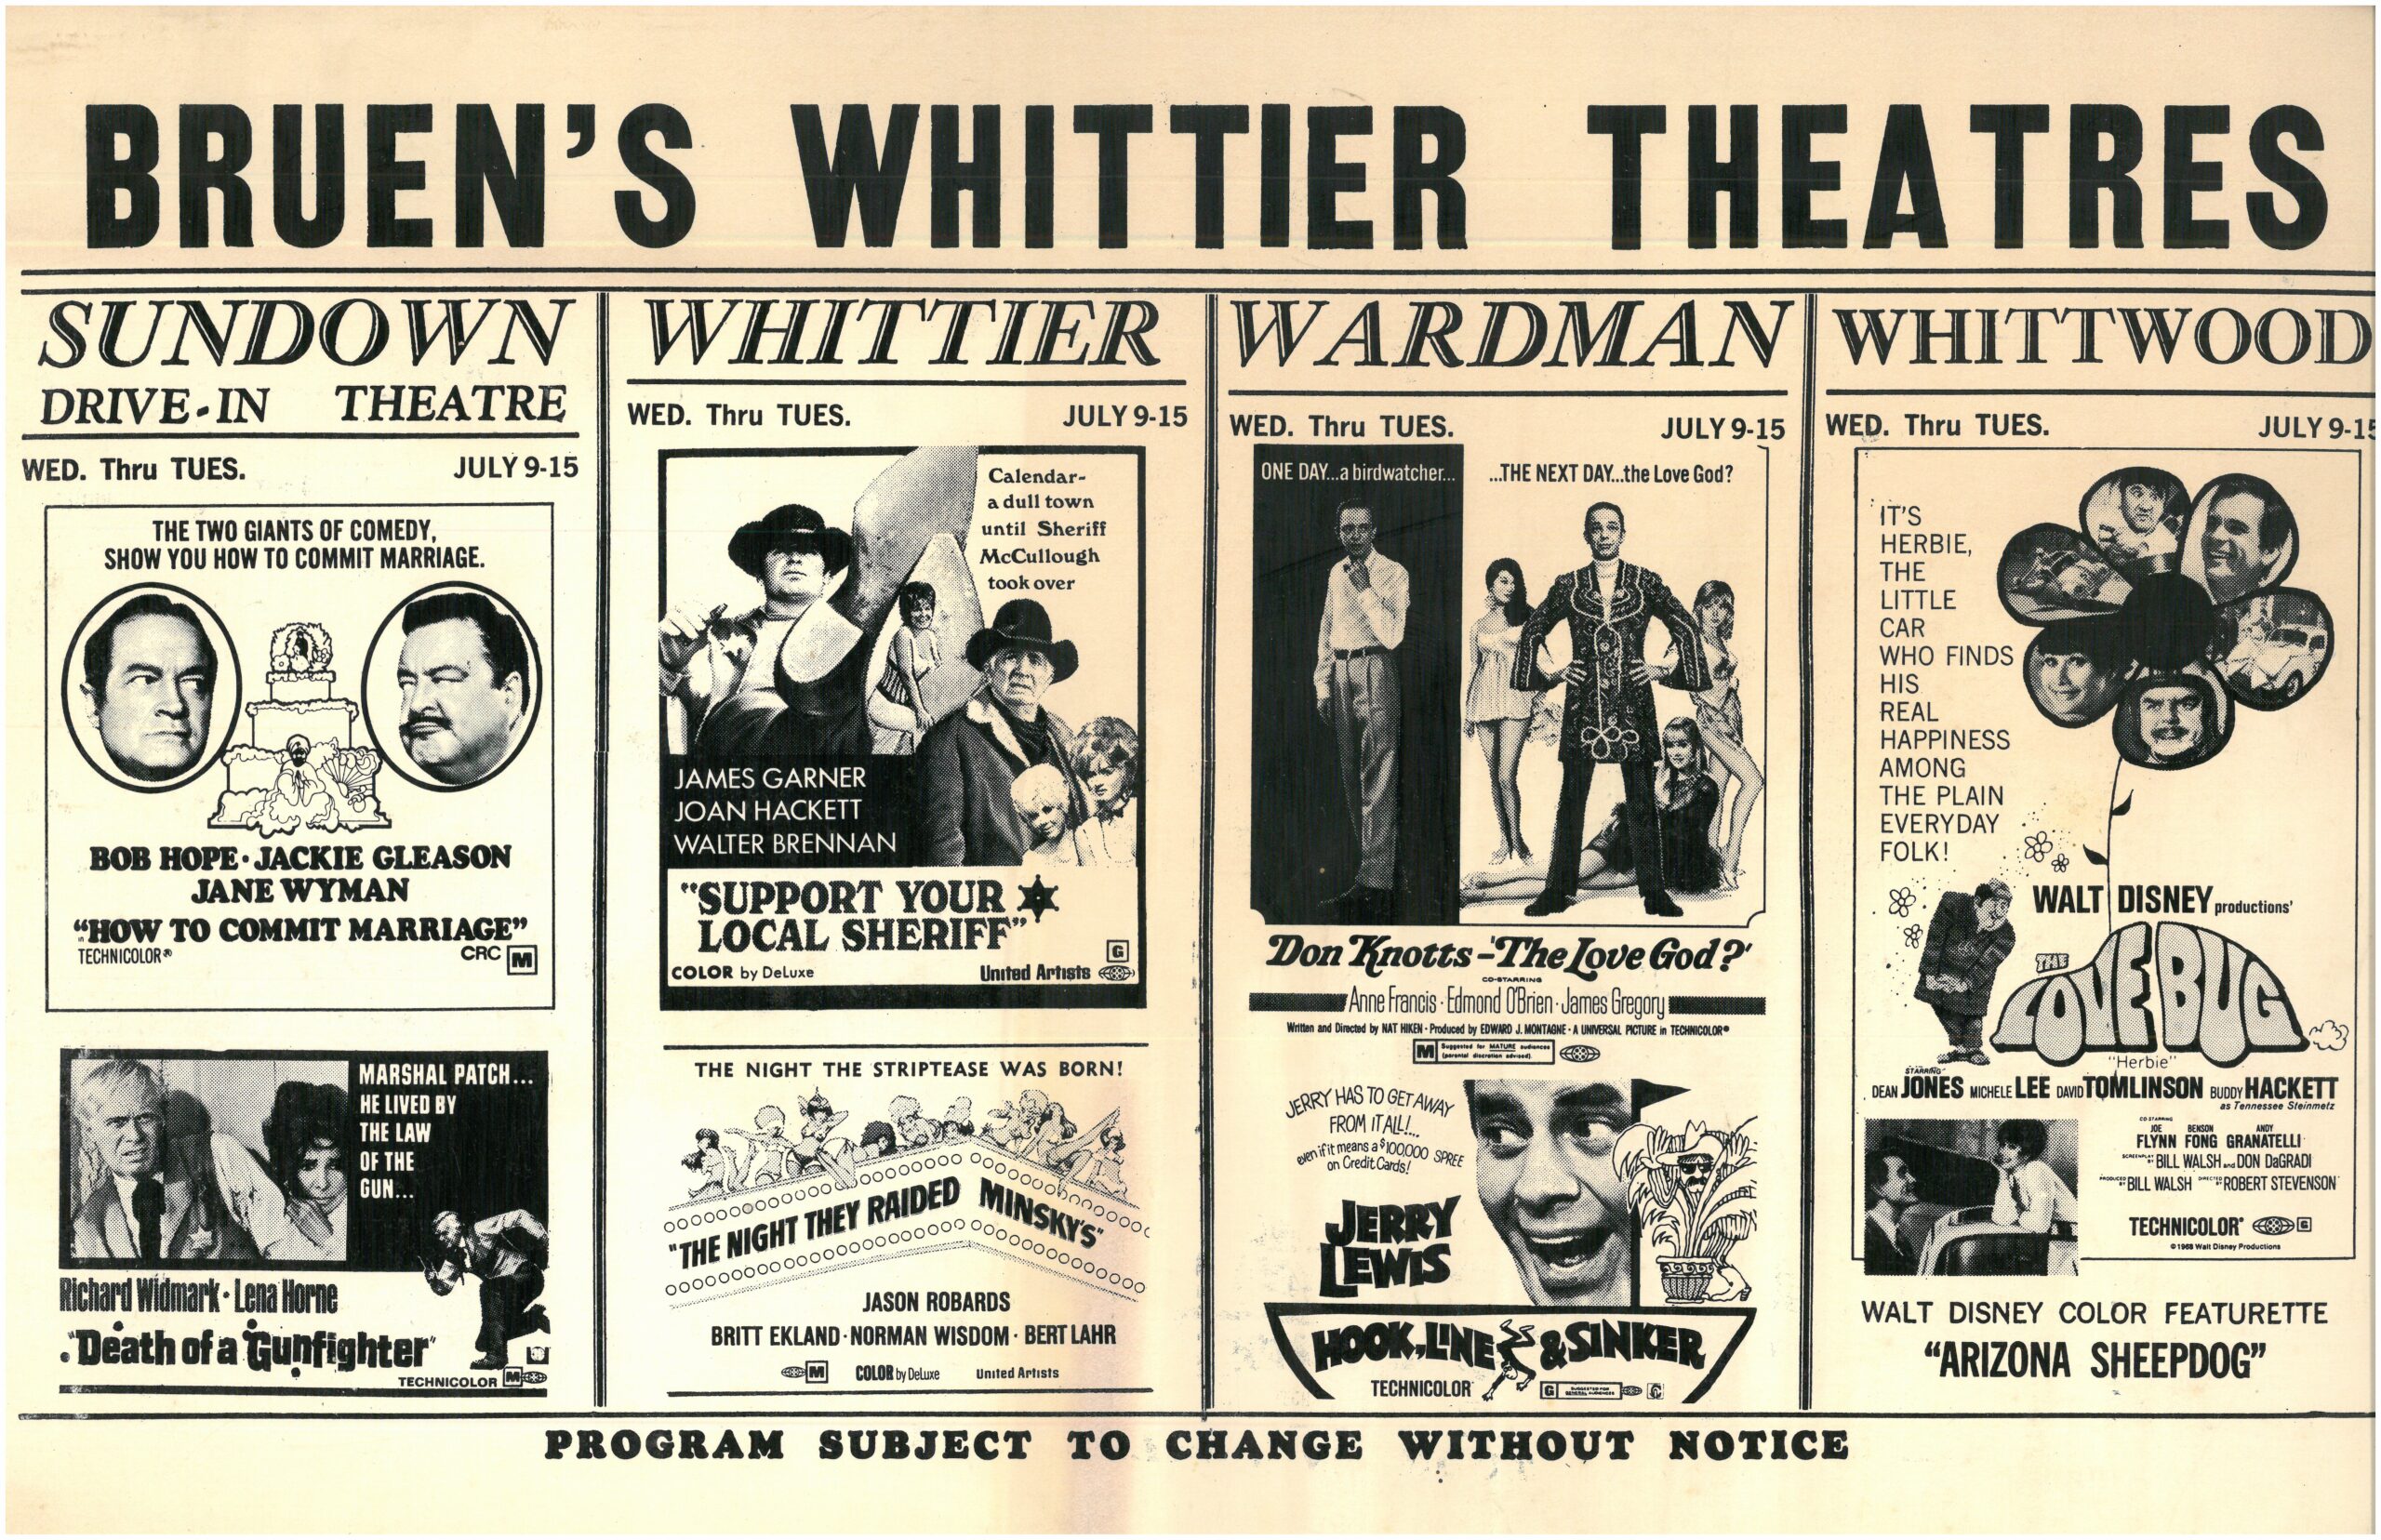 1960s movie theater advertisement featuring the four local movie theaters of Whittier.